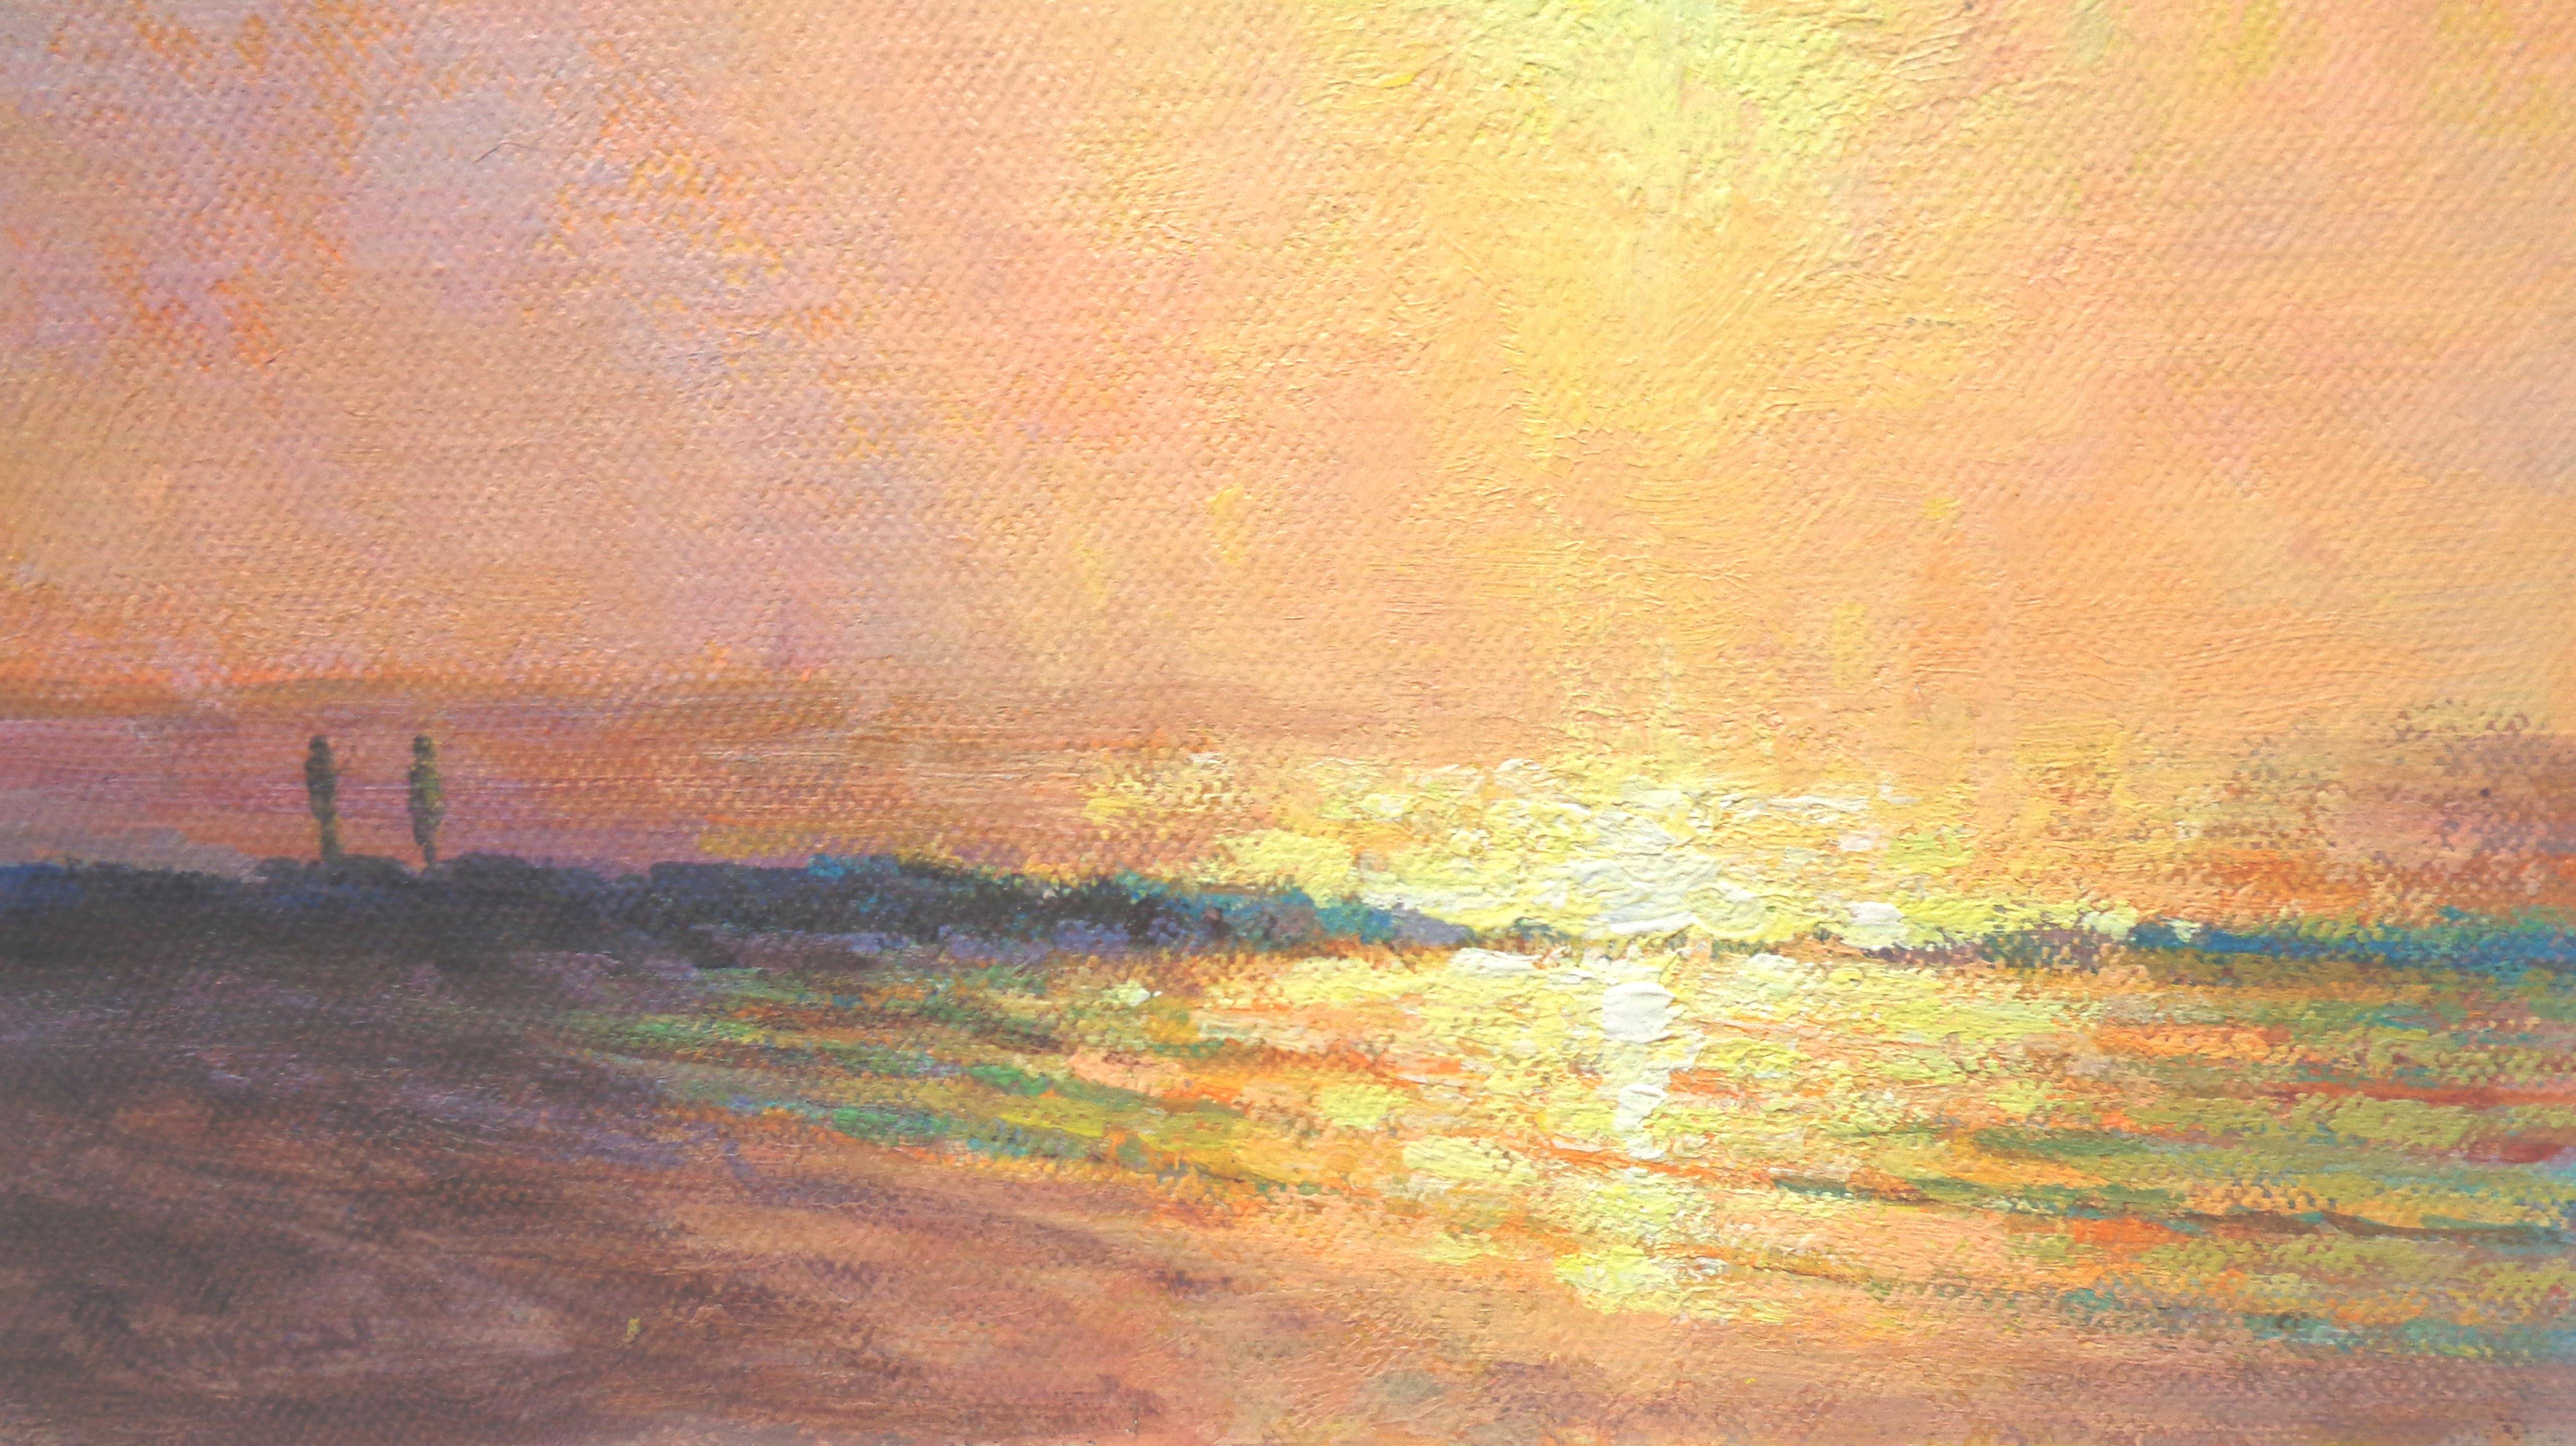 Ocean Beach Impressionistic Seacape Sunrise Oil Painting by Michael Budden 4